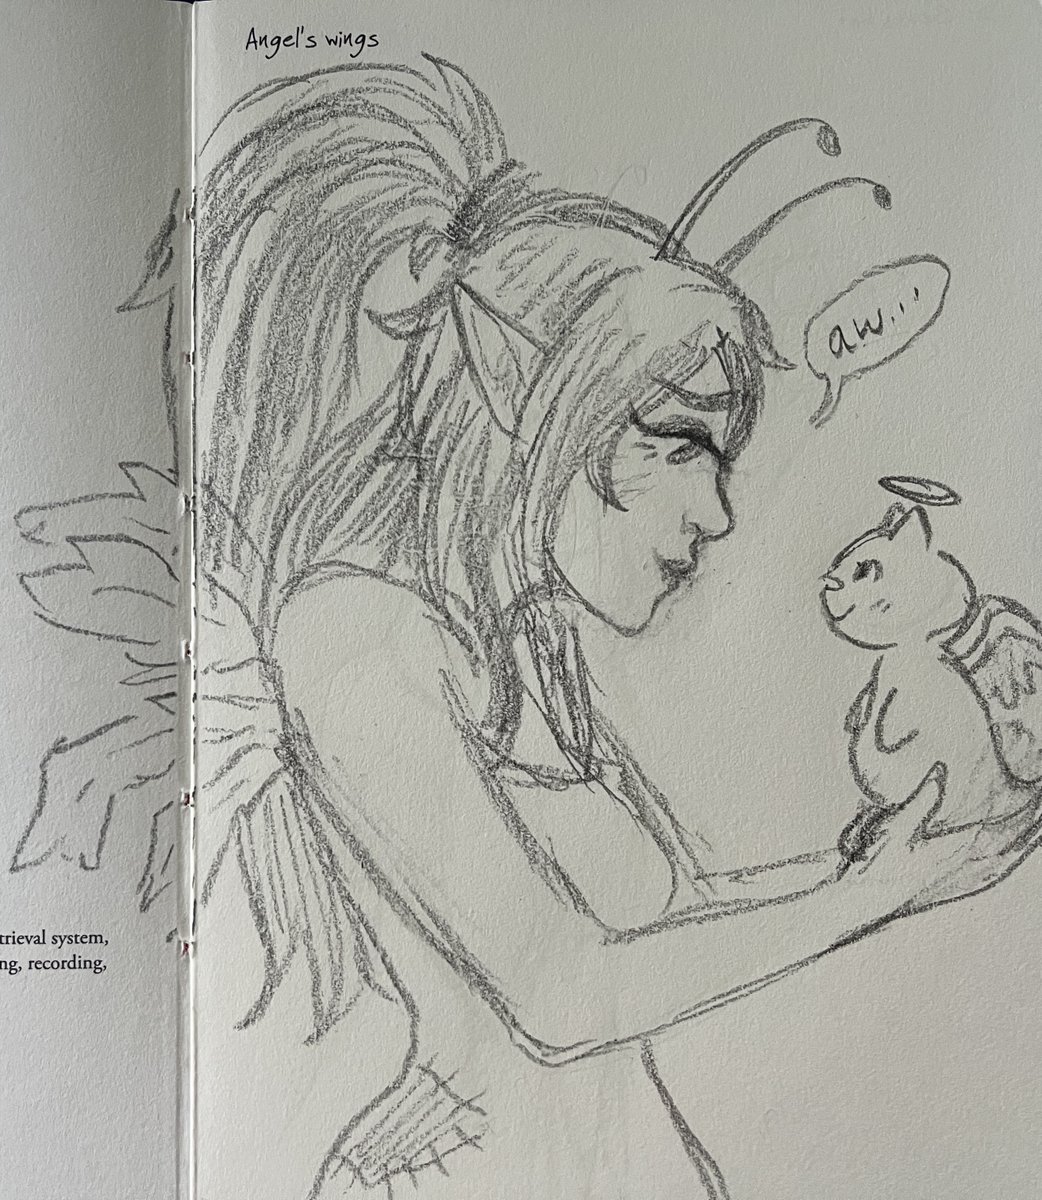 starting #200drawingprompts - 1 prompt a day.
(a sketchbook i picked up that is called '200 drawing prompts' by @PiccadillyInc ).

i am super rusty with pencil art. also i'm aiming to make every drawing in this #neopets-related.

day 1 - angel's wings
grey faerie with angelpuss